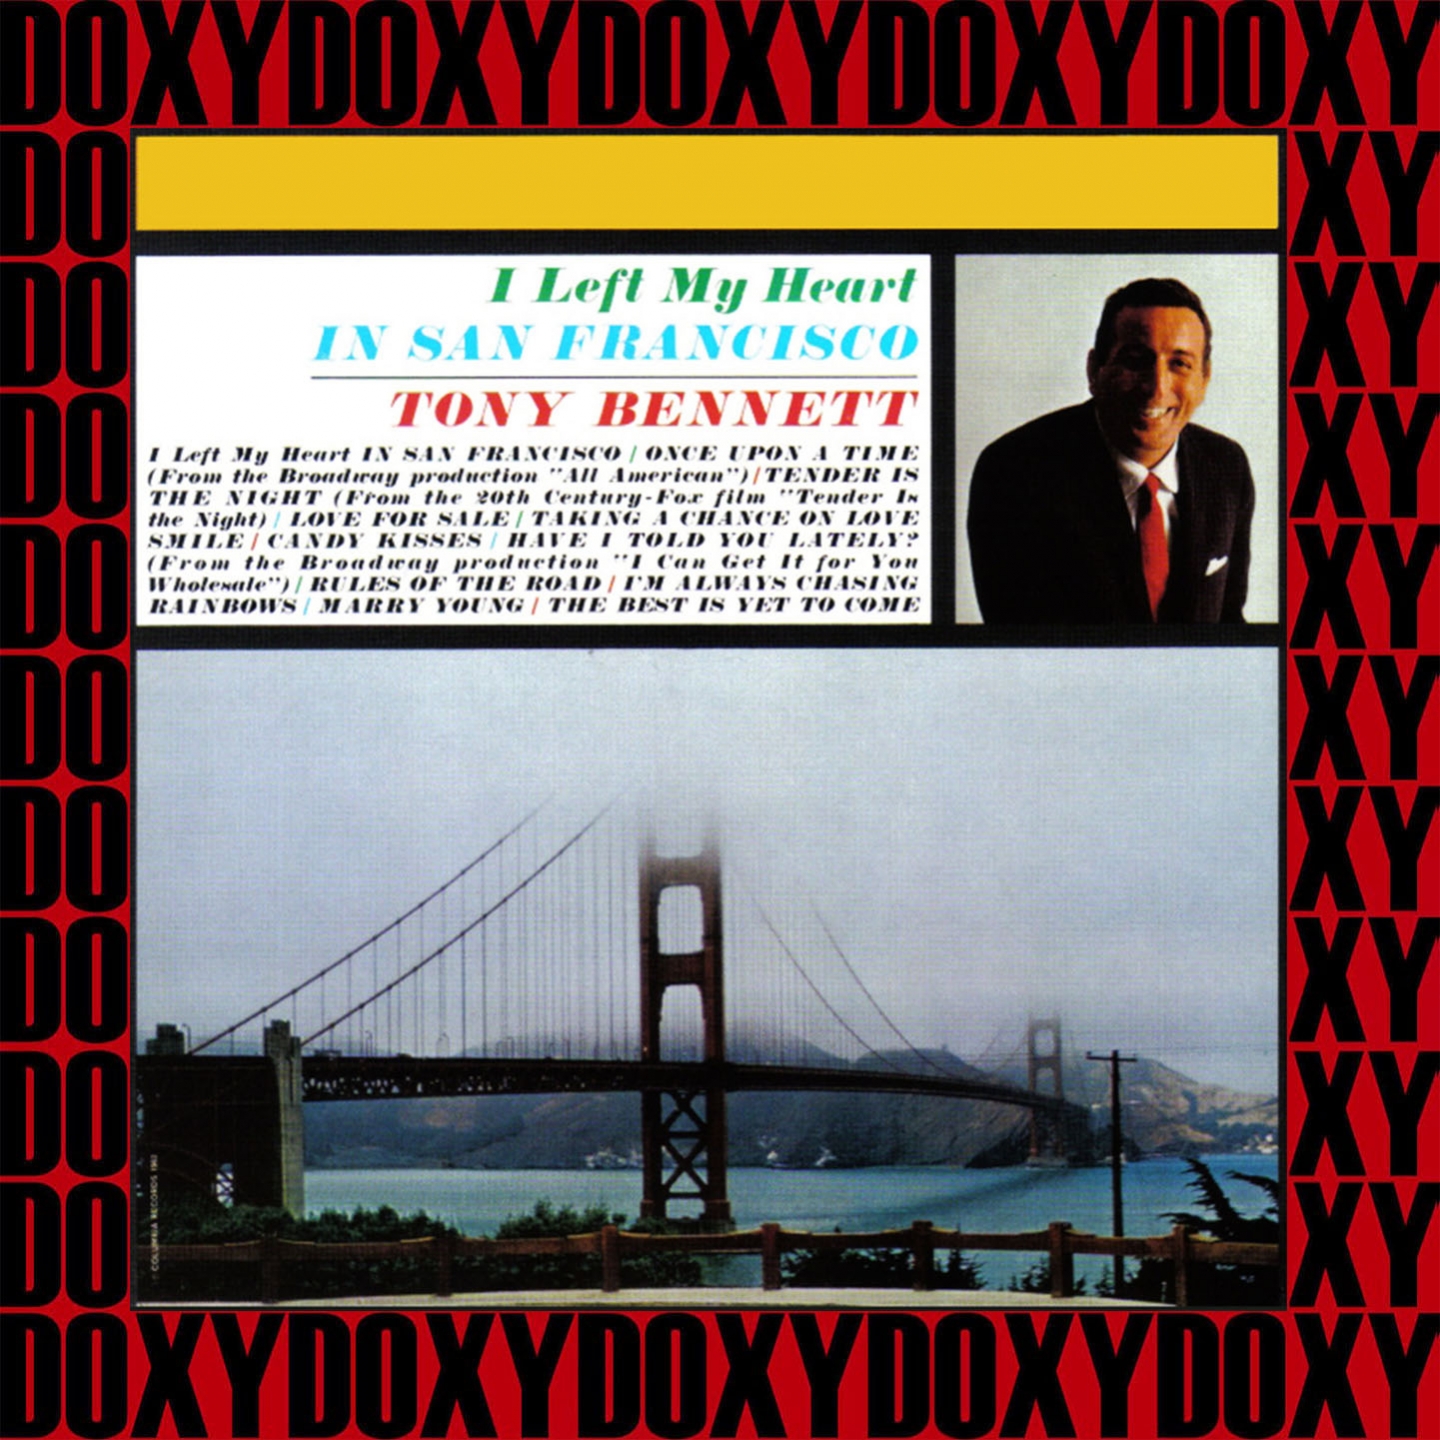 I Left My Heart In San Francisco (Remastered Version) (Doxy Collection)